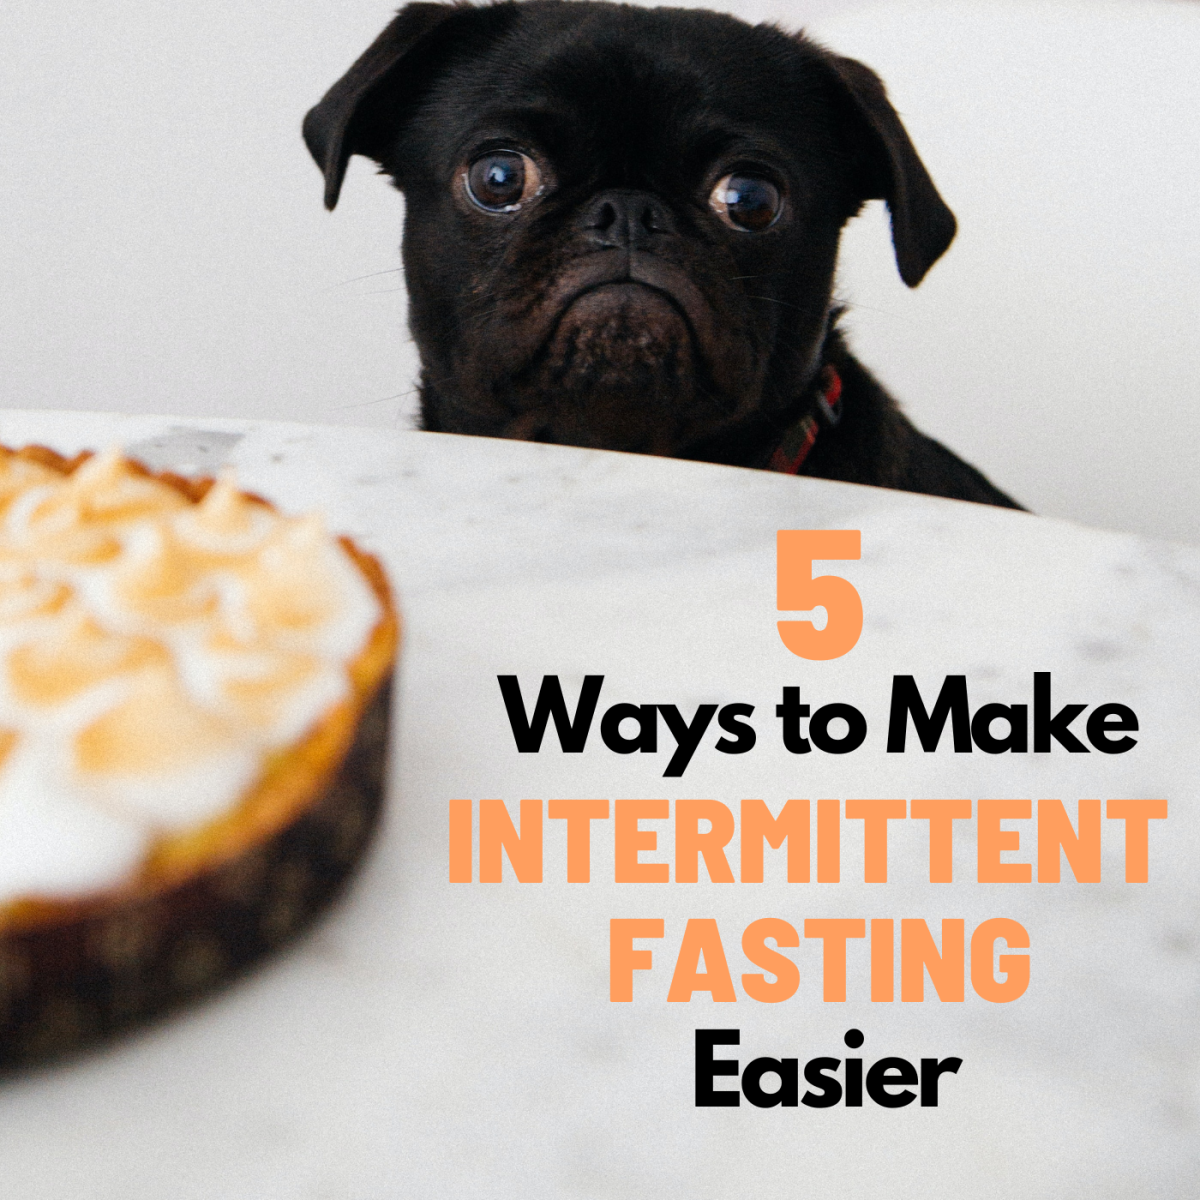 5 Ways to Make Intermittent Fasting Easier